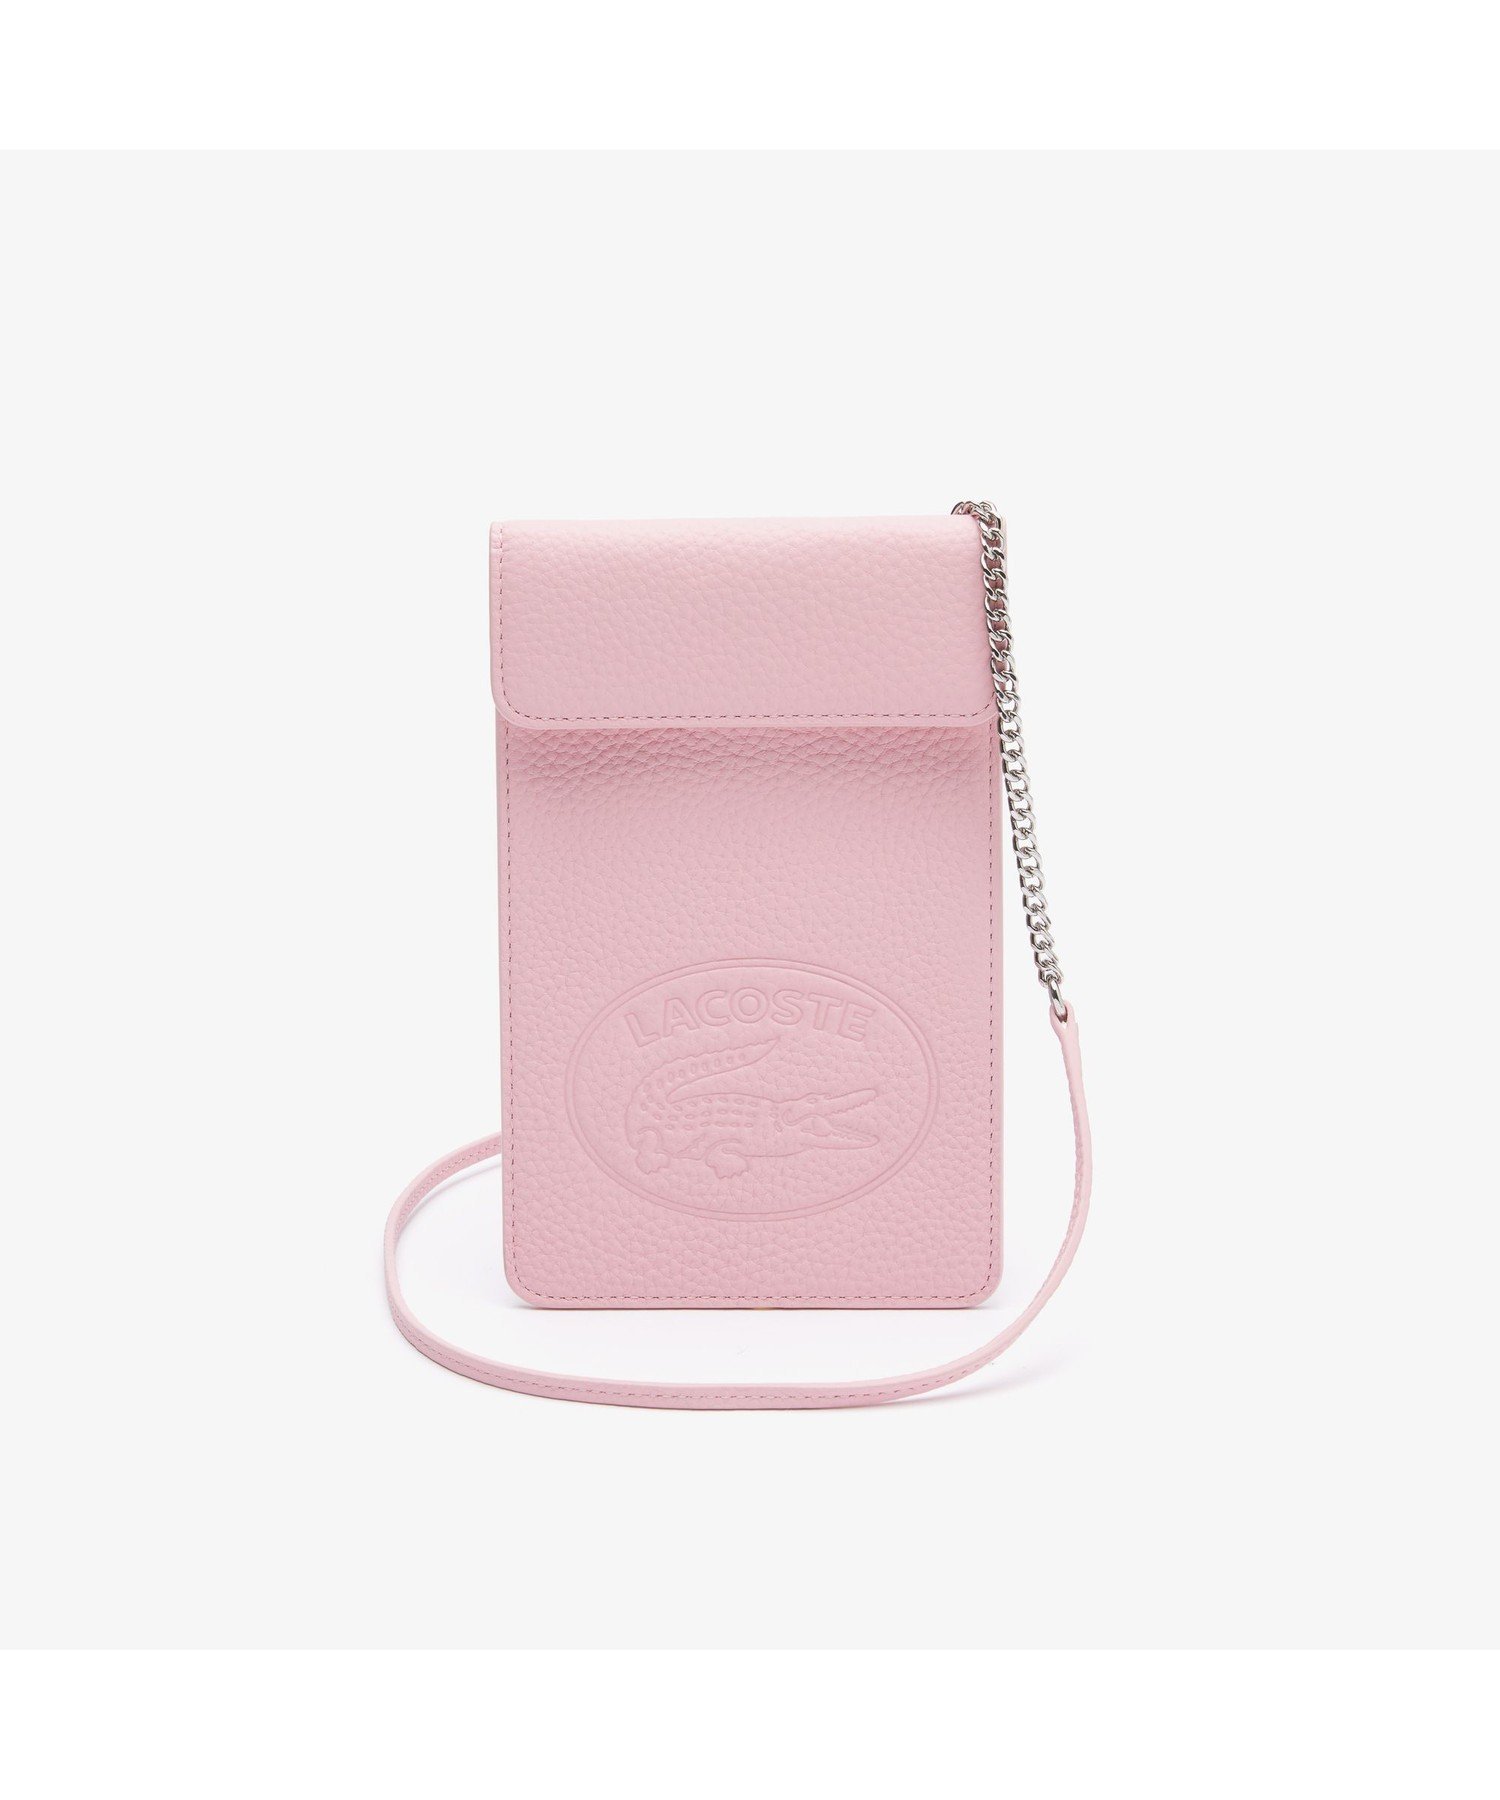 【SALE／30%OFF】LACOSTE クロコ クルー スマホポシェット ラコステ スマホグッズ・オーディオ機器 その他のスマホグッズ・オーディオ機器 ピンク ブラック【送料無料】